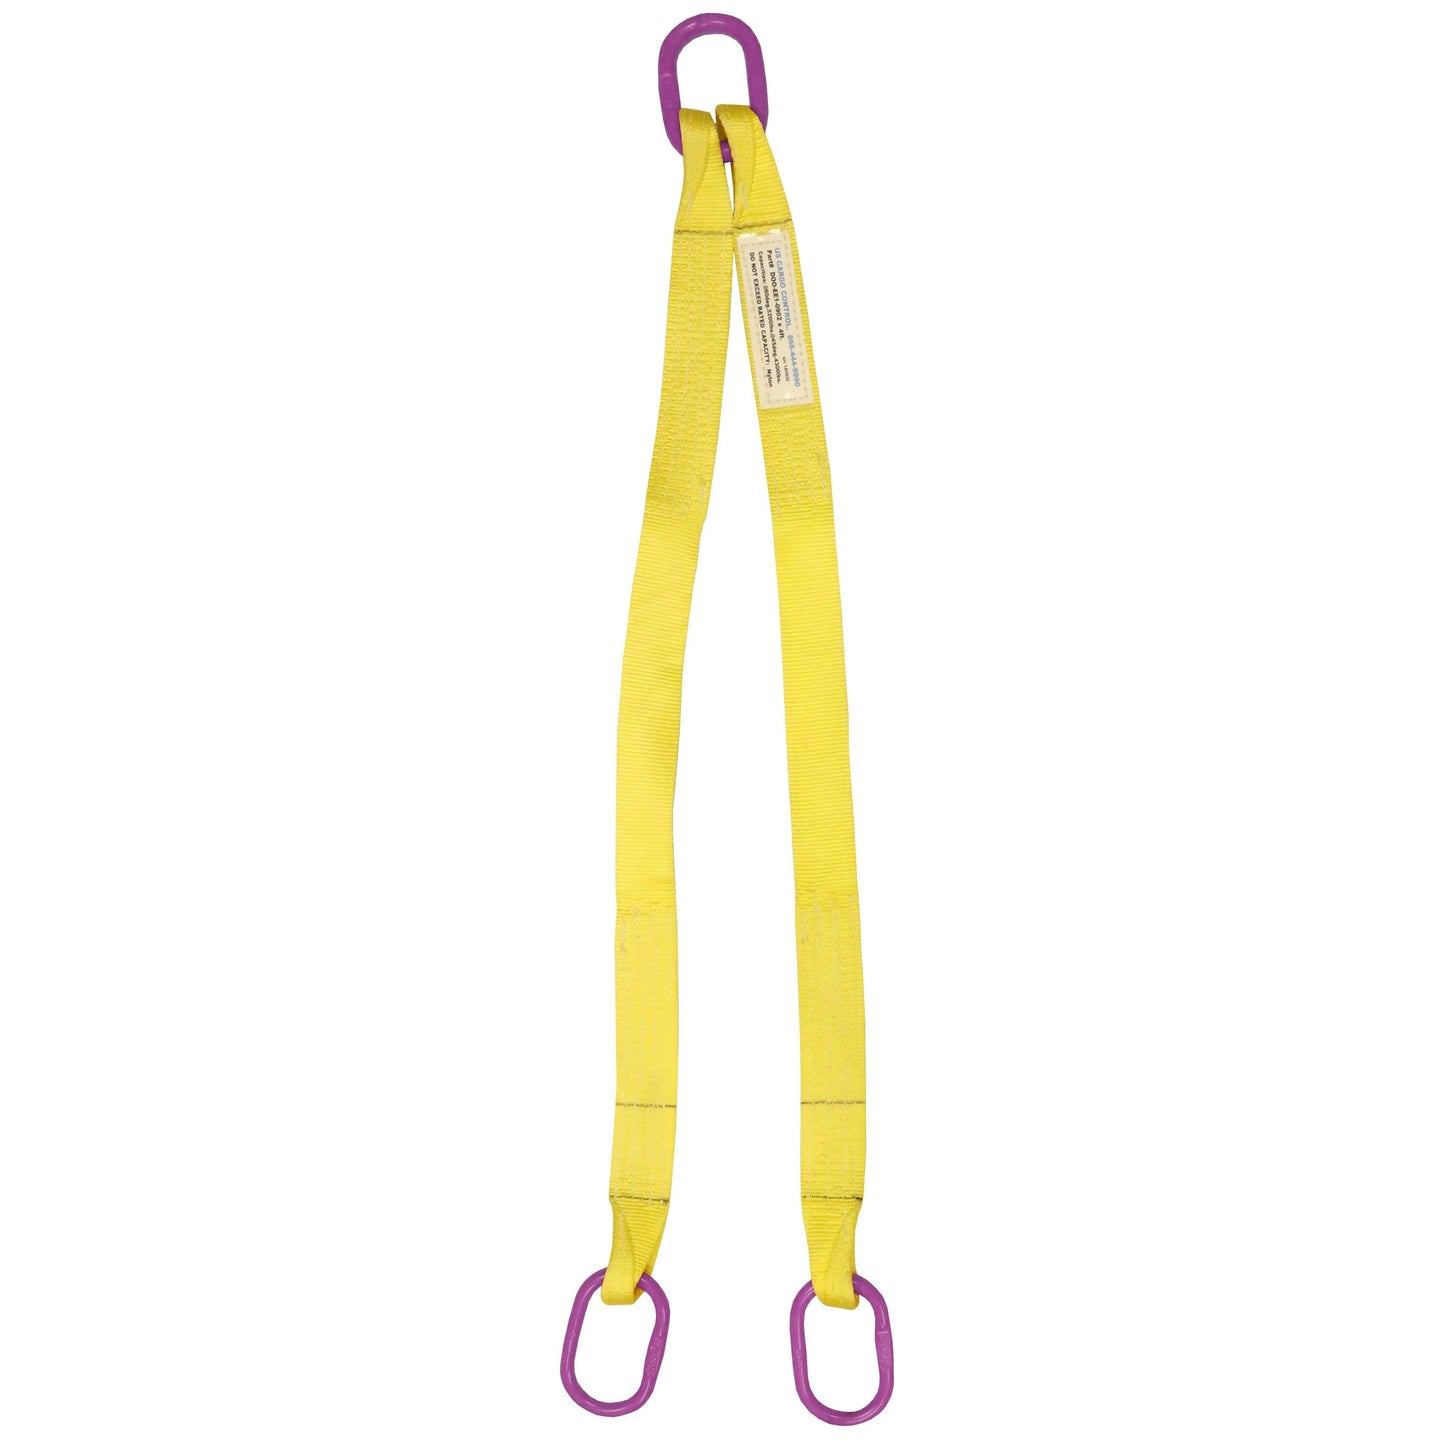 2 inchx4 foot (1 ply) Double Leg Nylon Sling w Master Link Both Ends image